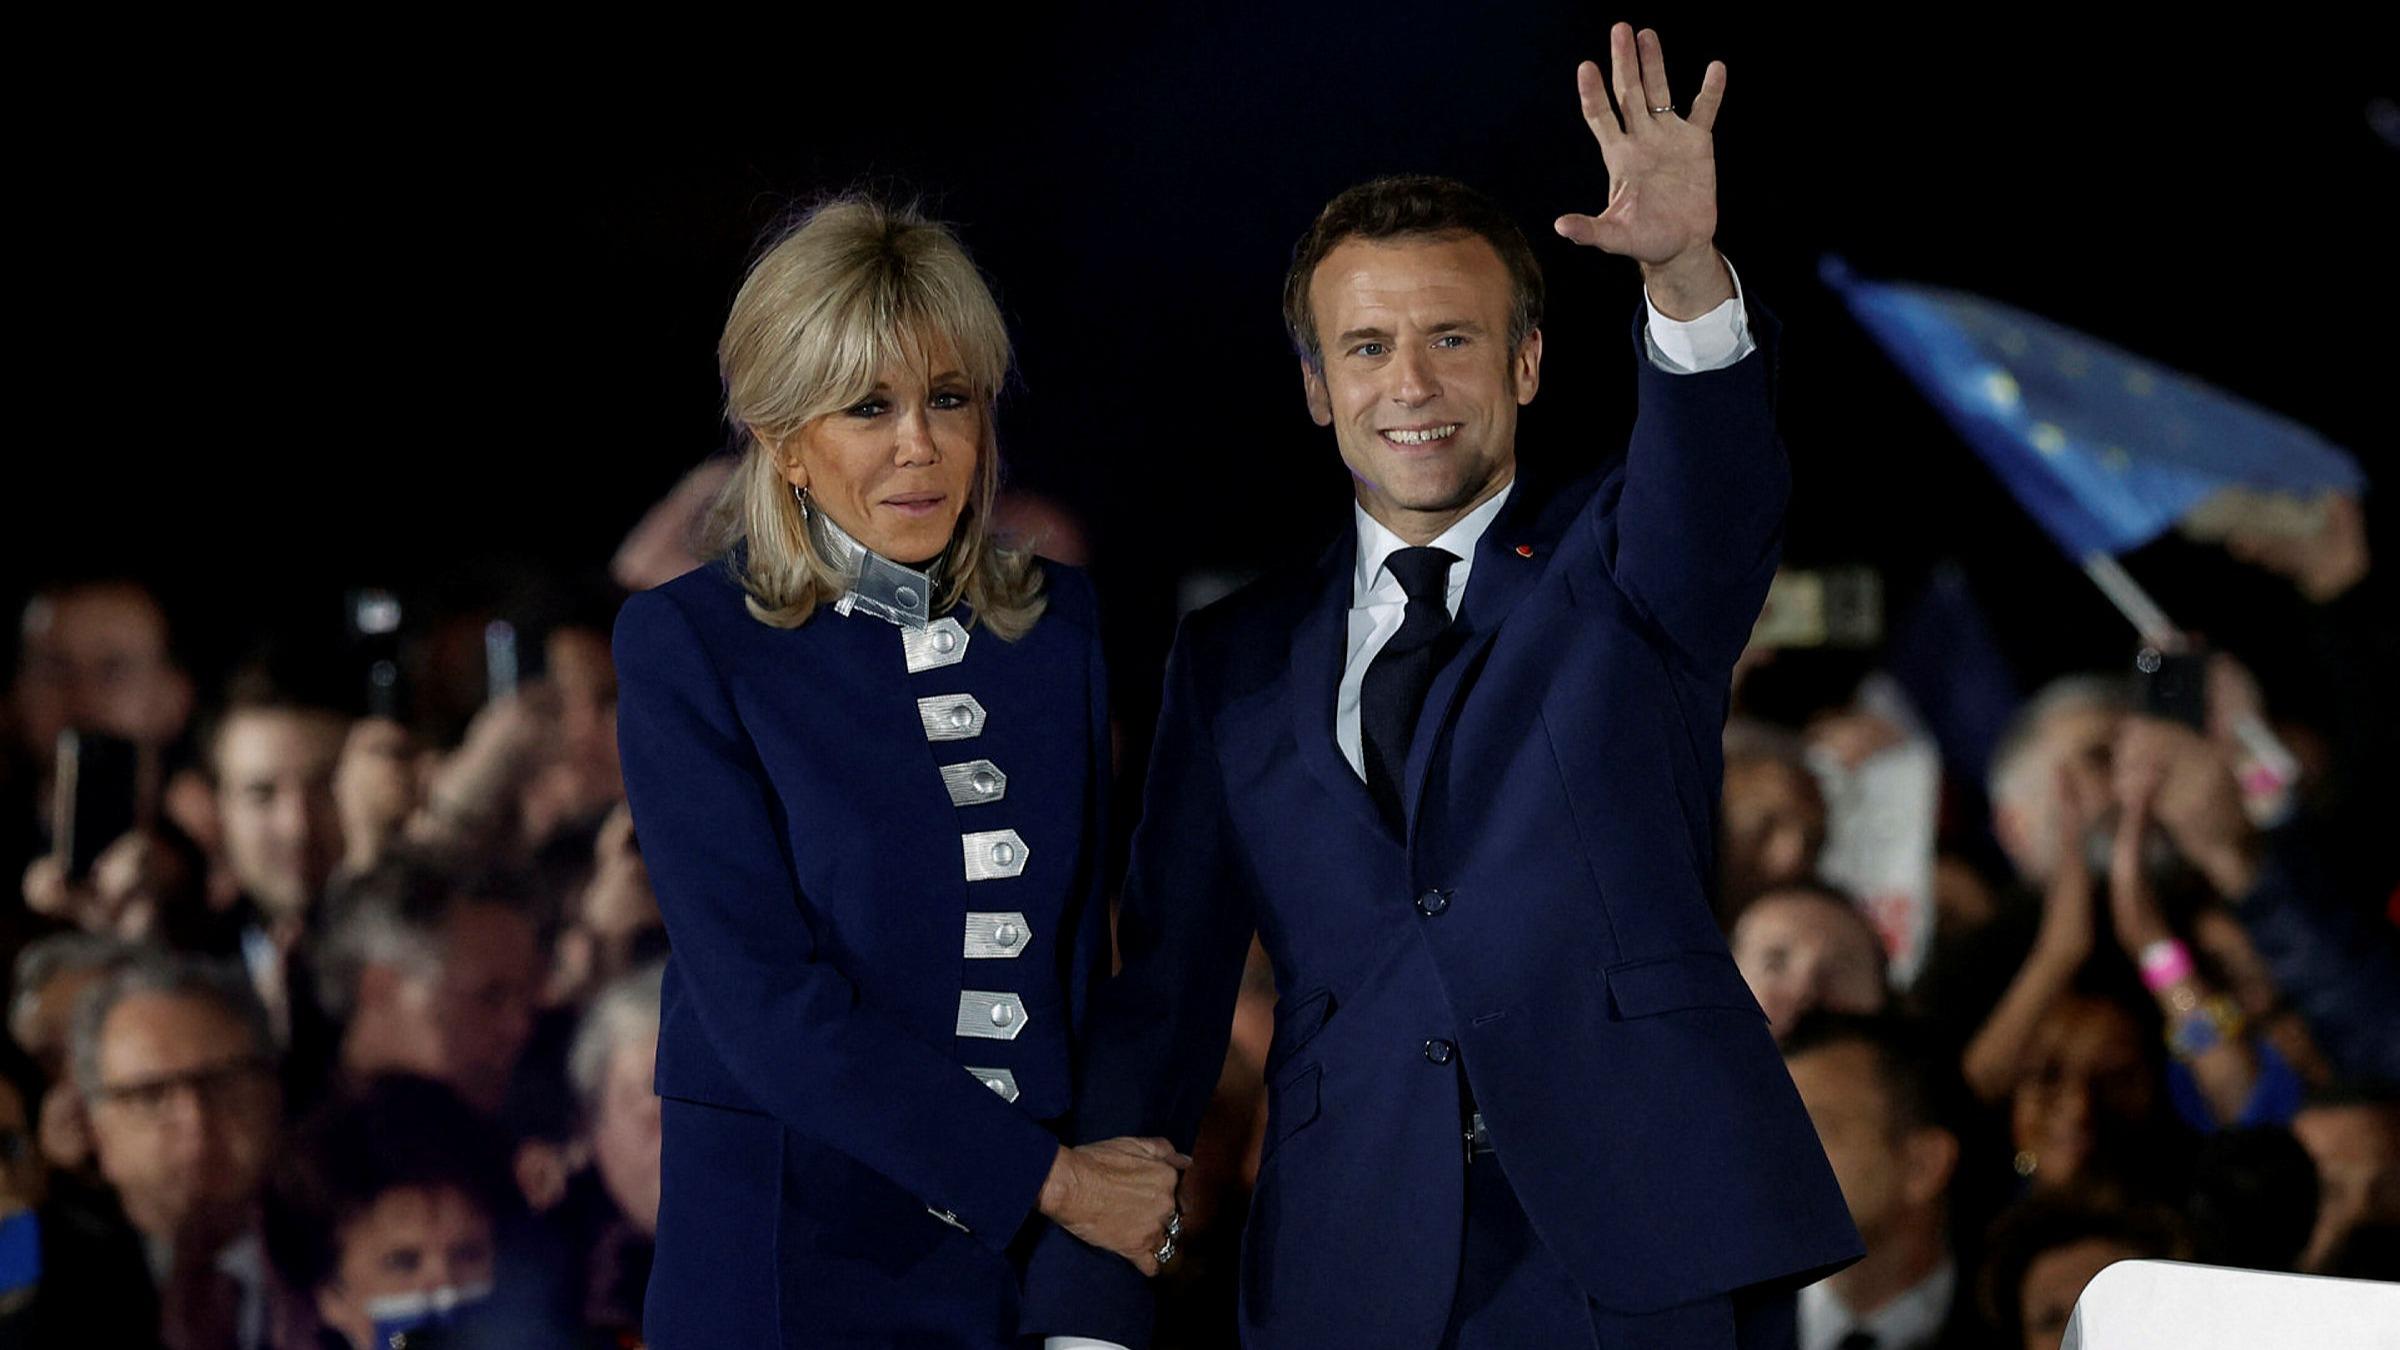 Emmanuel Macron is elected as French President for another term_50.1